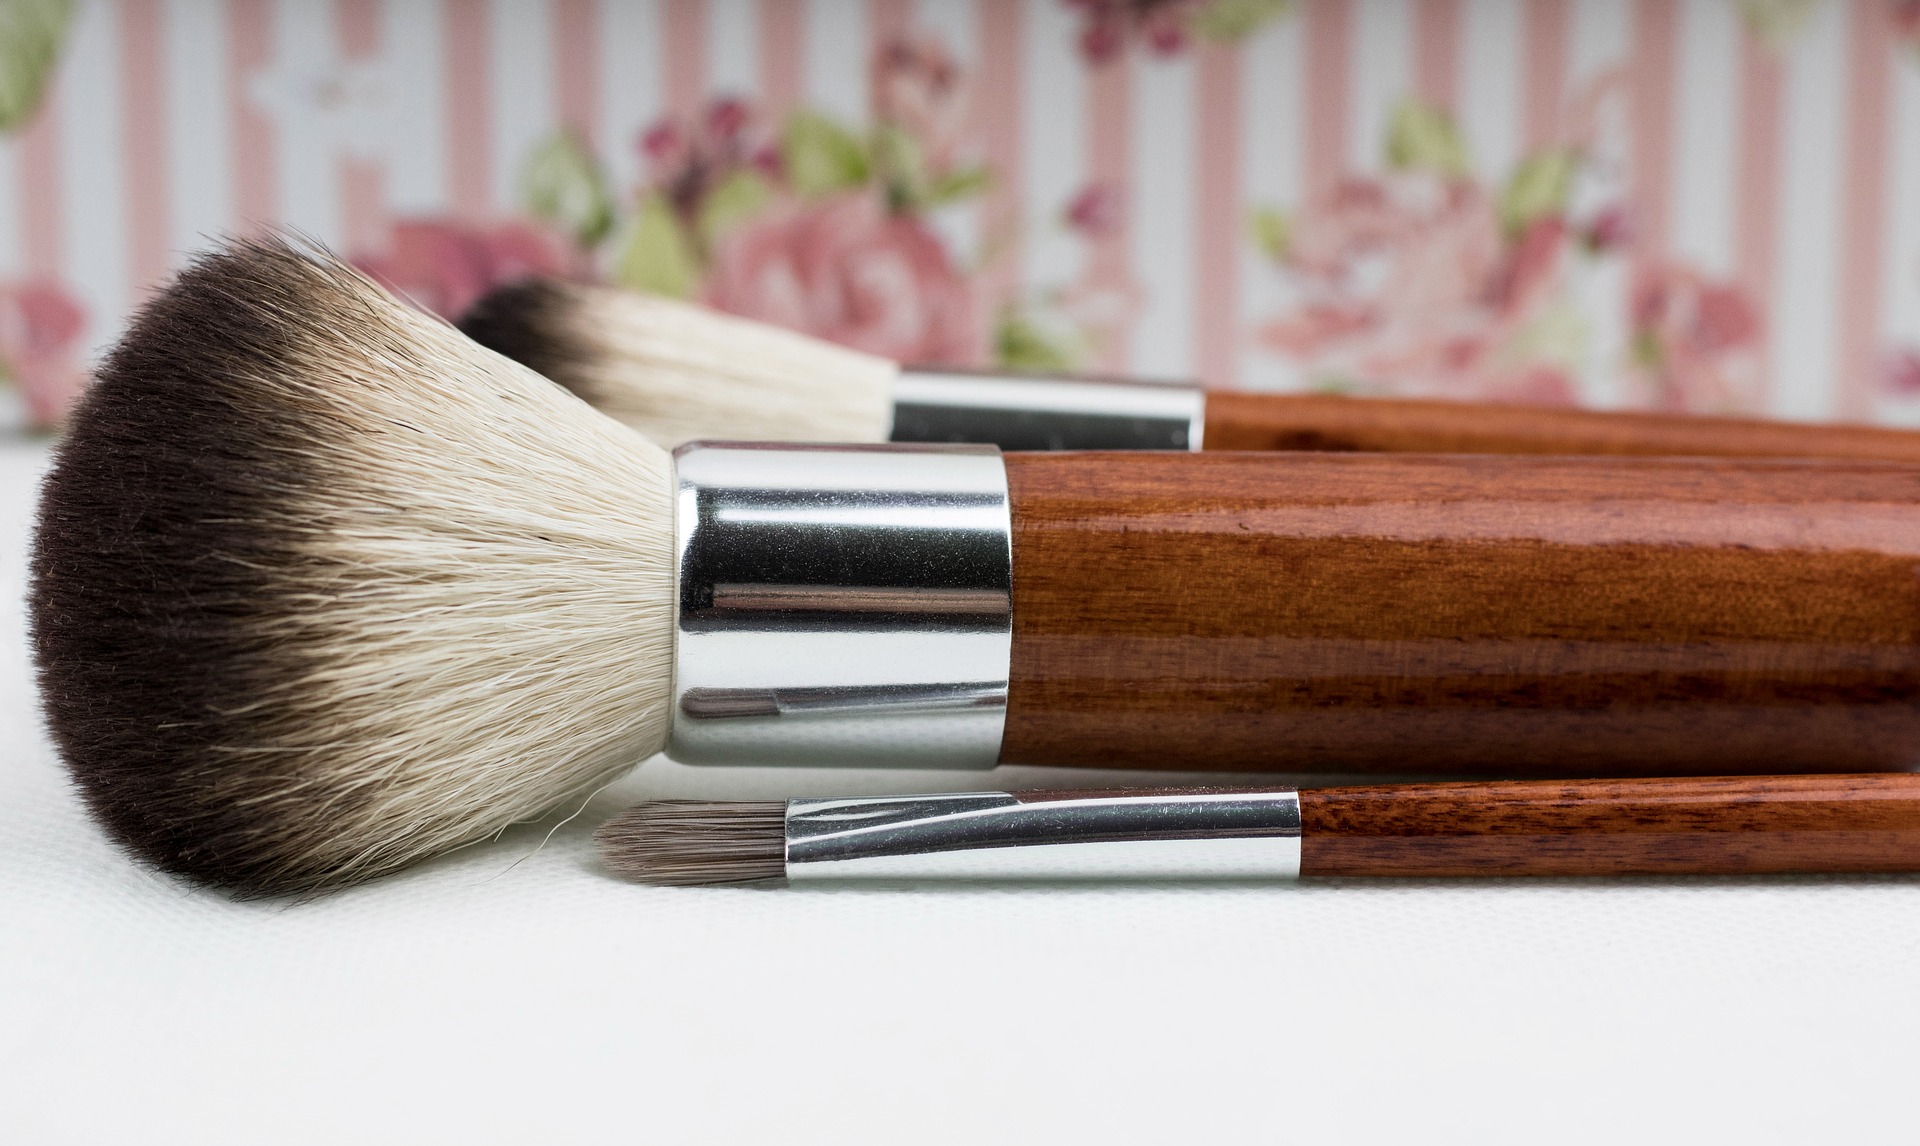 Shoppers who already have a set of brushes may need to replace just one. But a full set makes a great holiday gift, doesn't it?